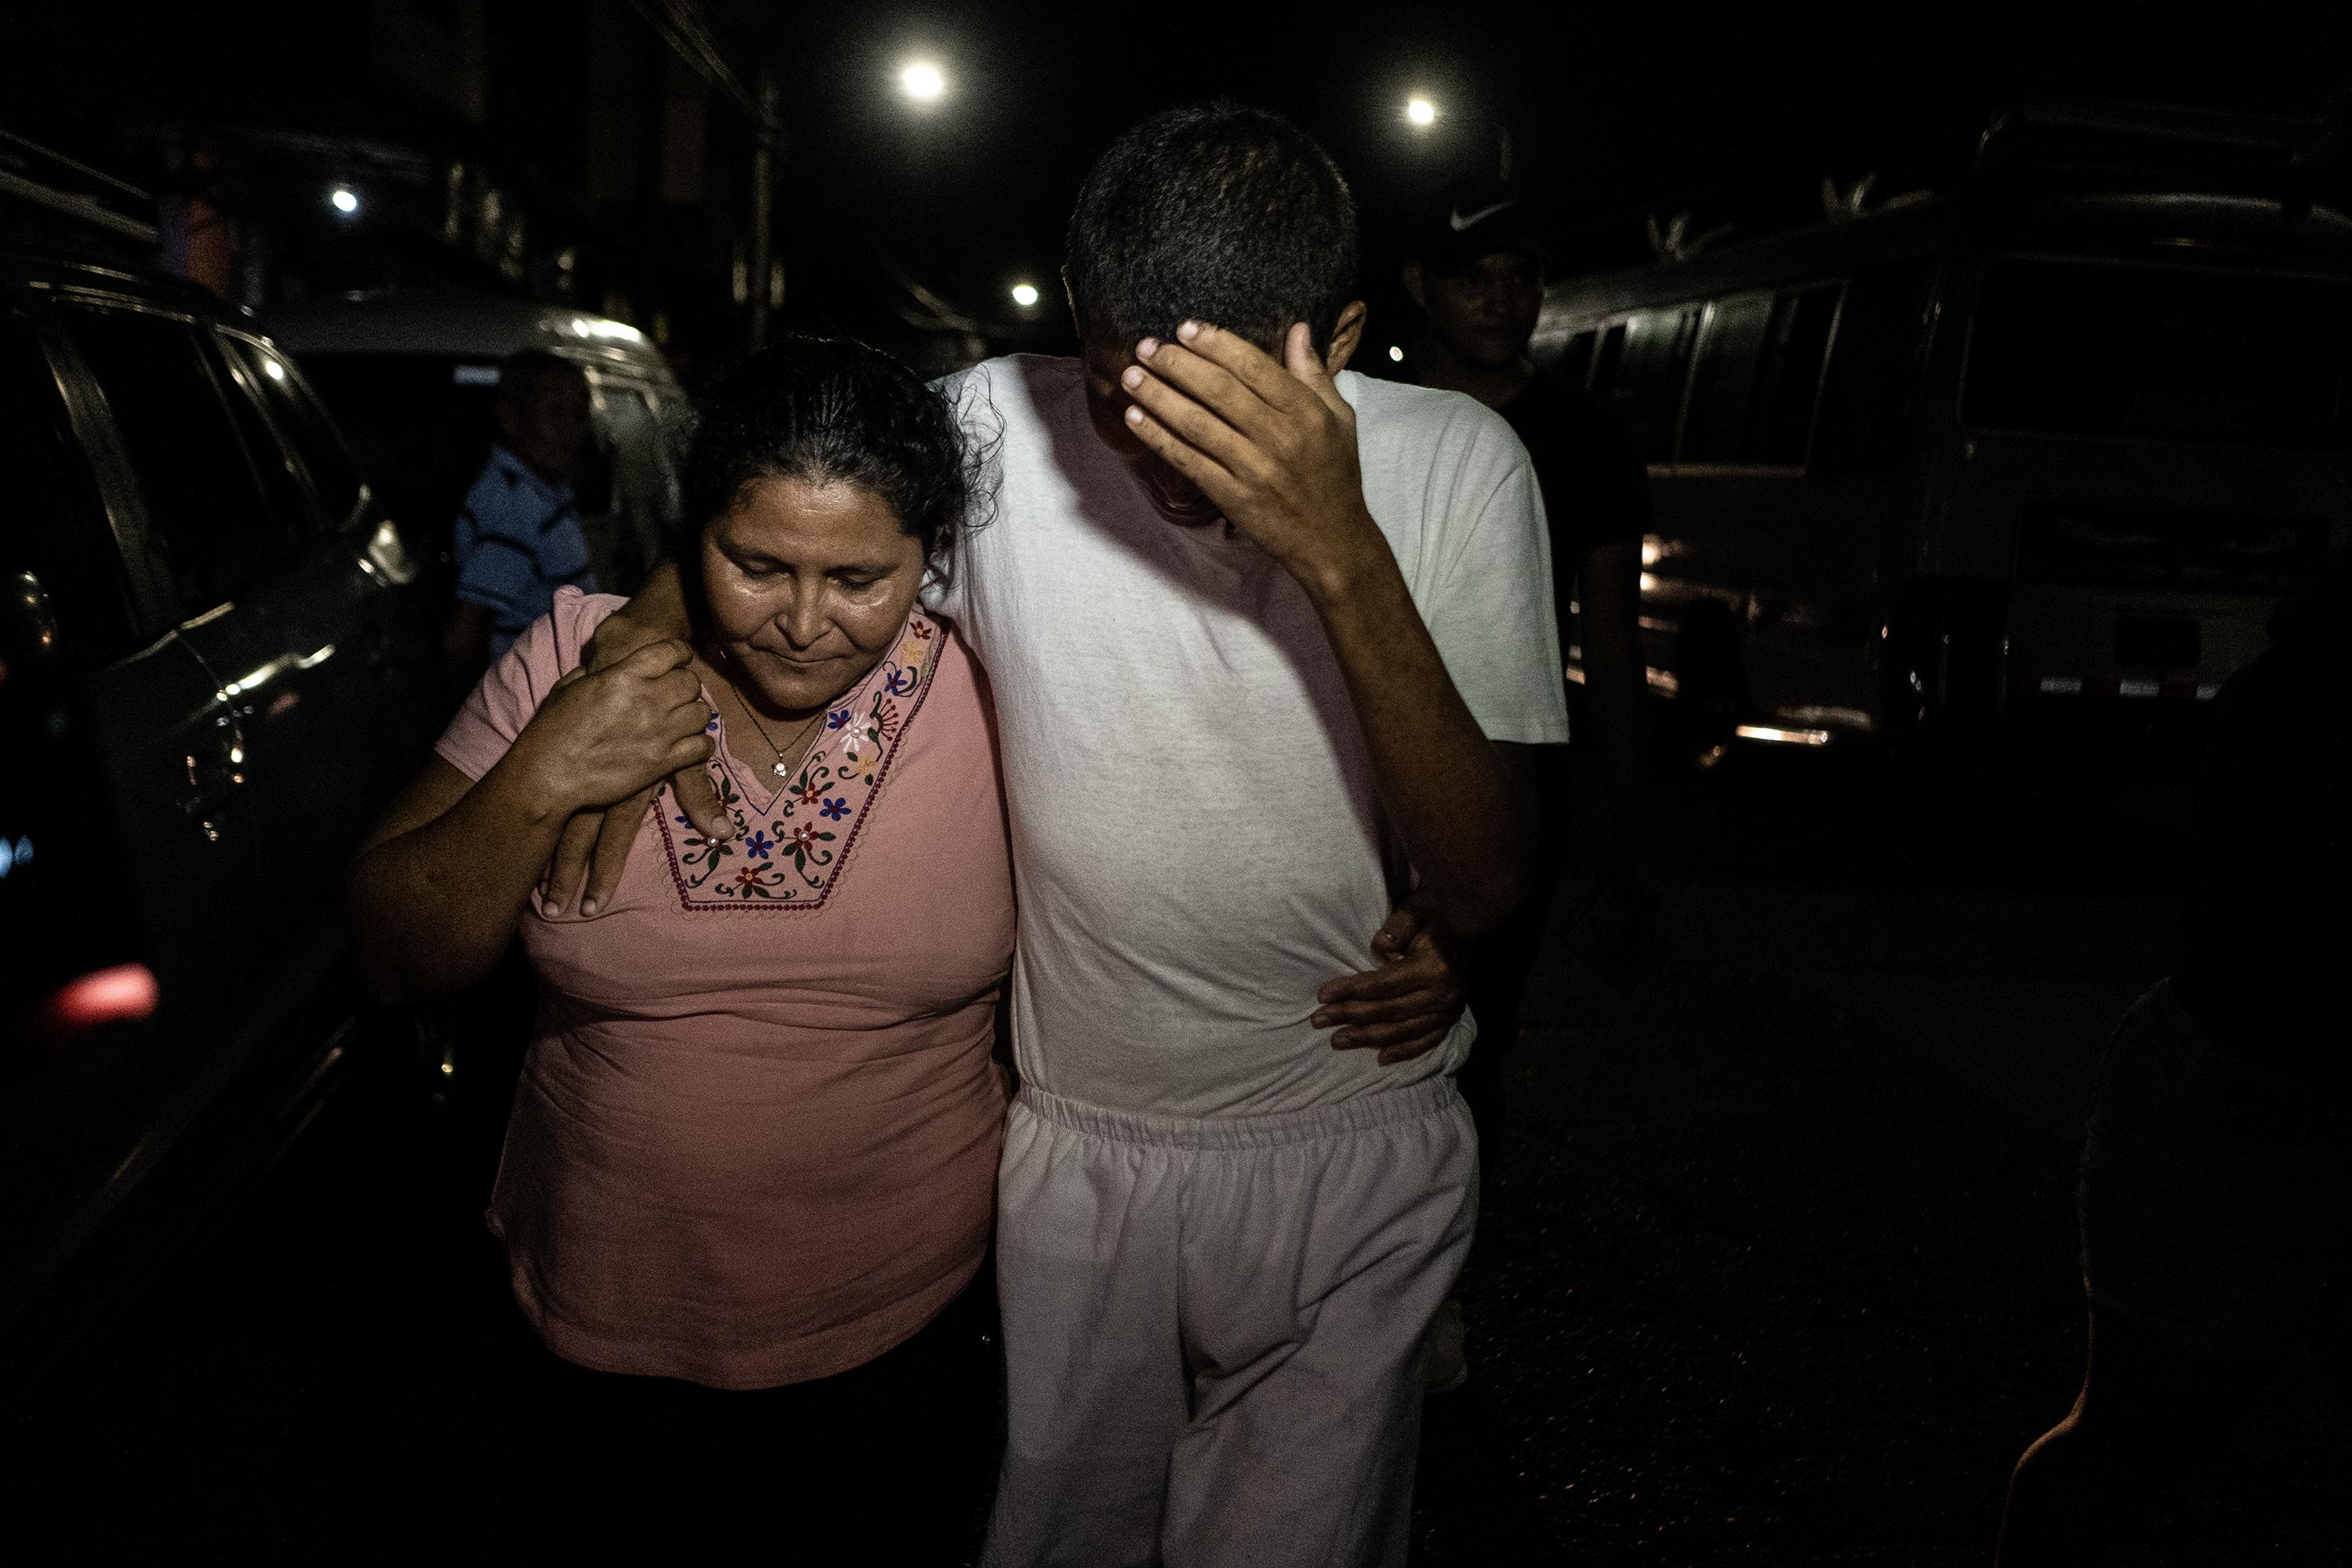 For one week, this mother was waiting for the release of her son outside a prison known as El Penalito, in San Salvador. The young man was released on September 26, 2022, after being imprisoned for three months. Photo: Carlos Barrera/El Faro